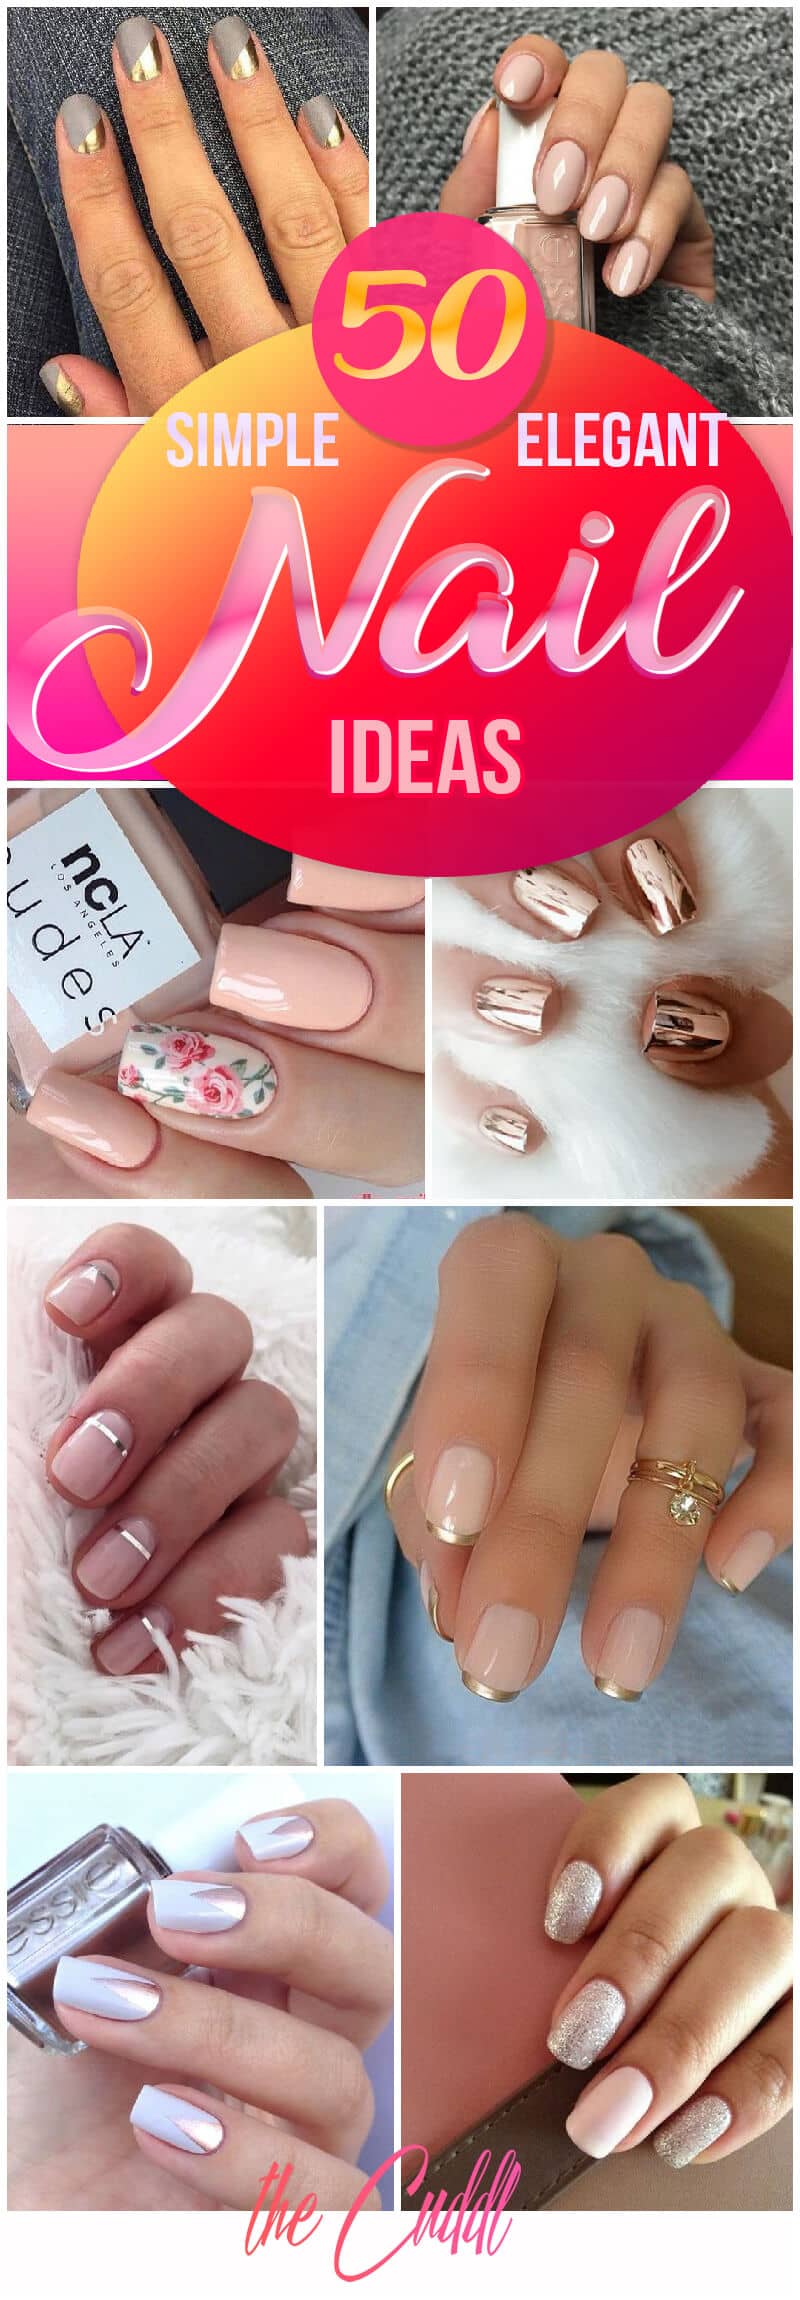 50 Simple & Elegant Nail Ideas to Express Your Personality